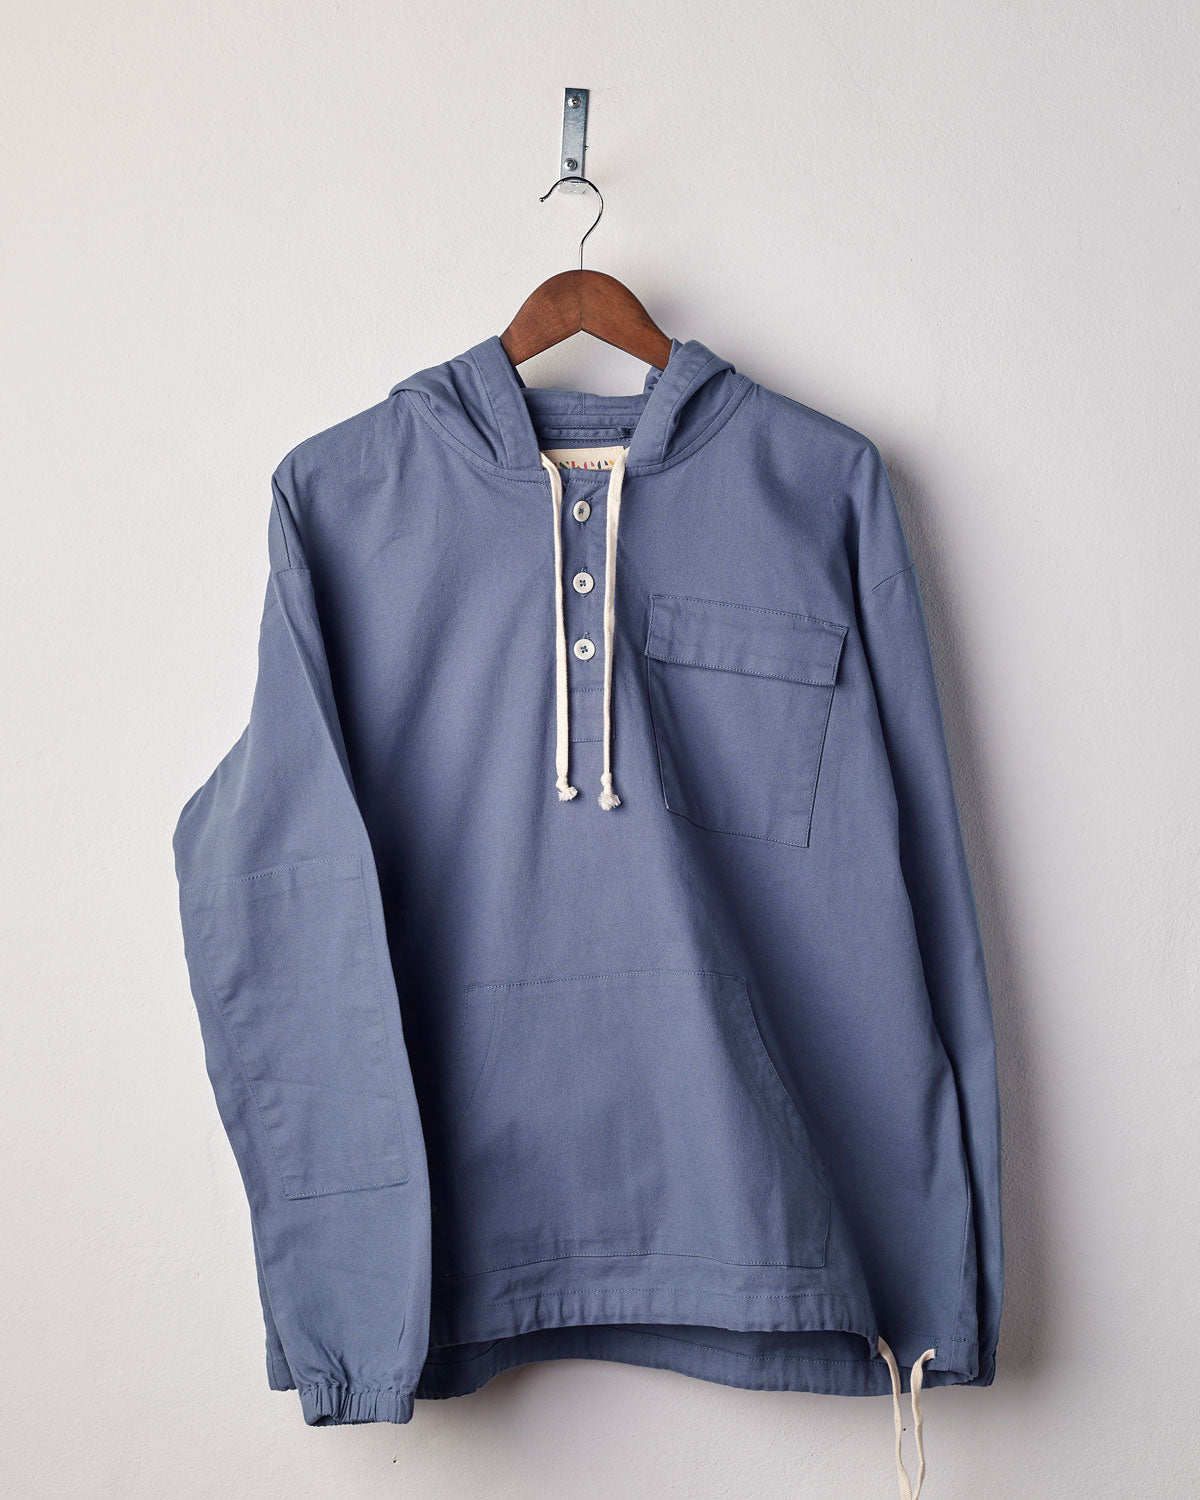 Front view of teal coloured buttoned smock from Uskees with deep front pockets. Presented on hanger with white backdrop.